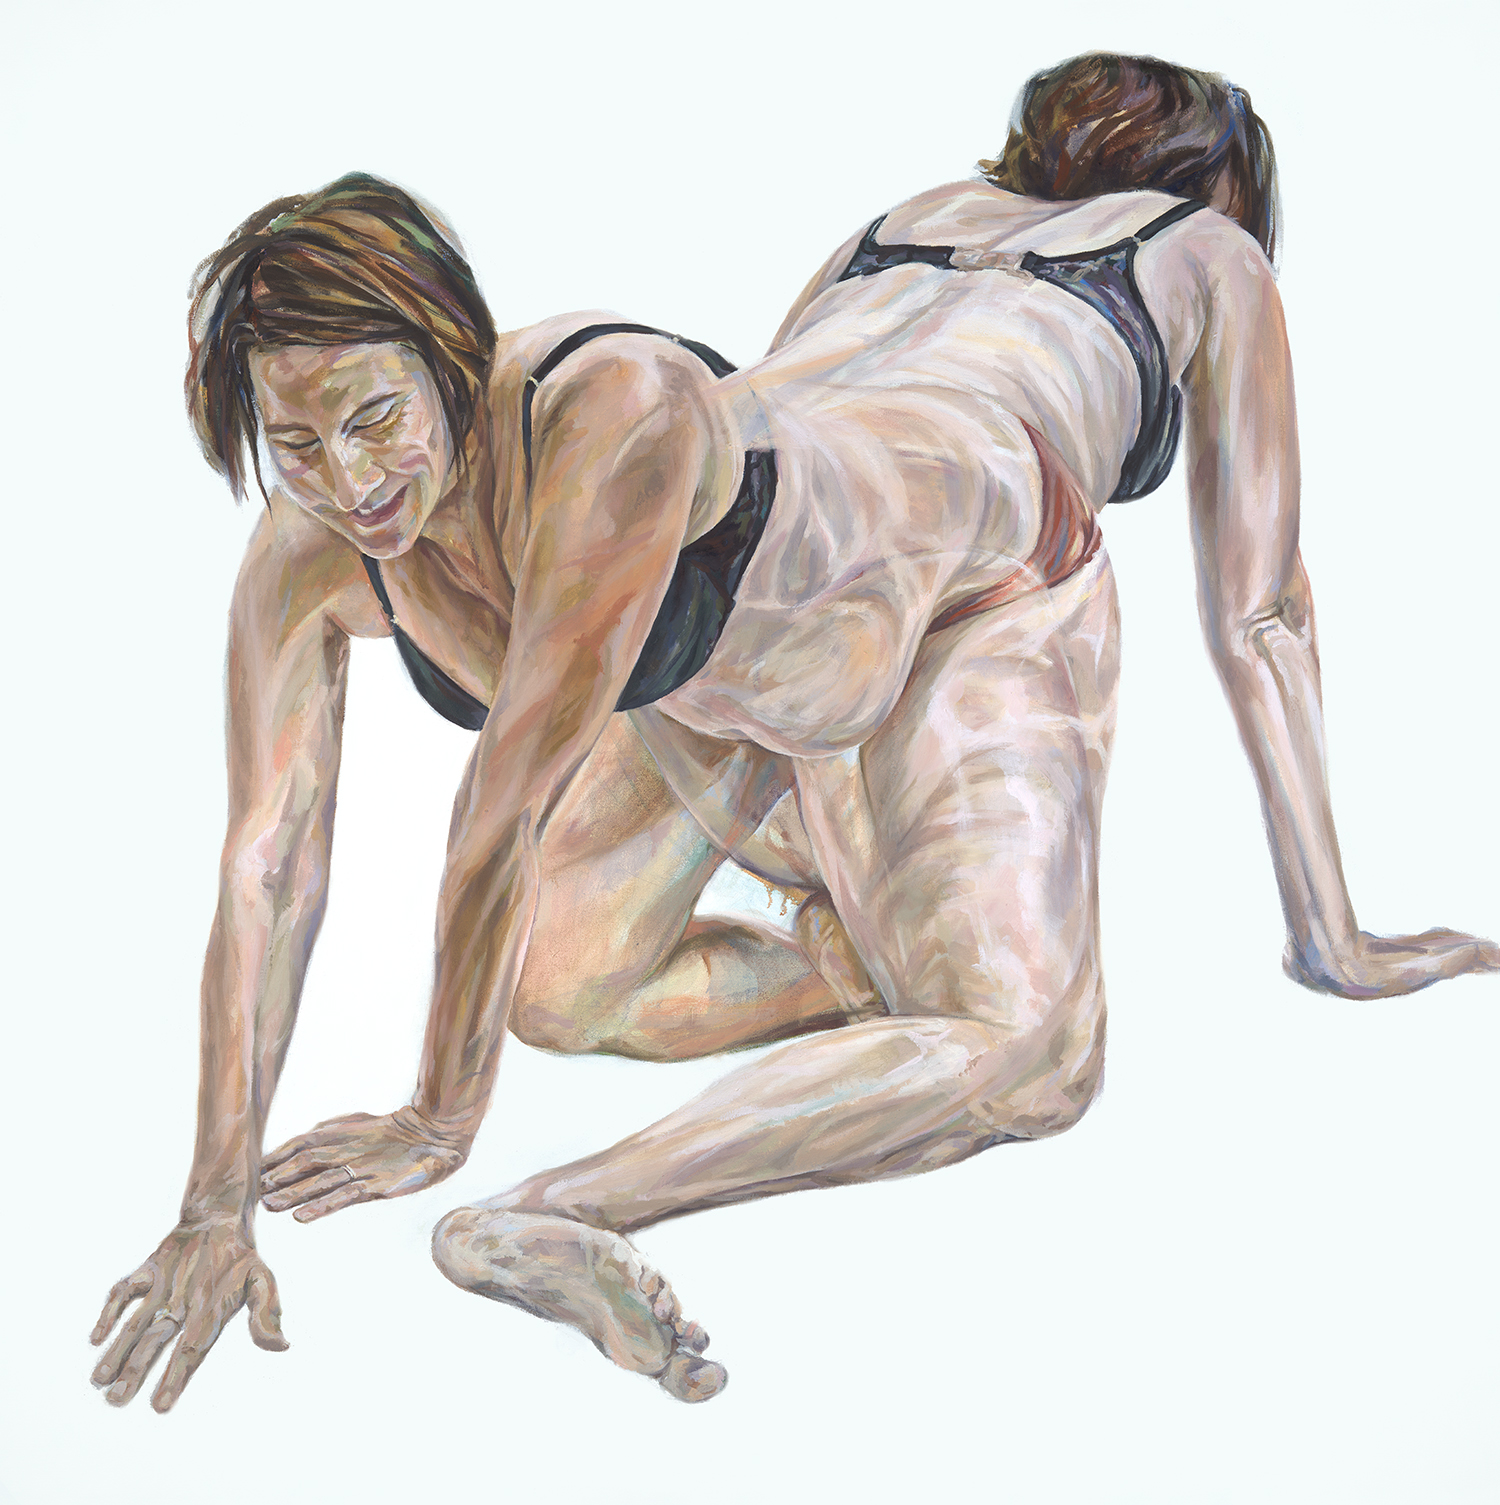 Oil painting of 2 overlapping figures of nude pregnant woman